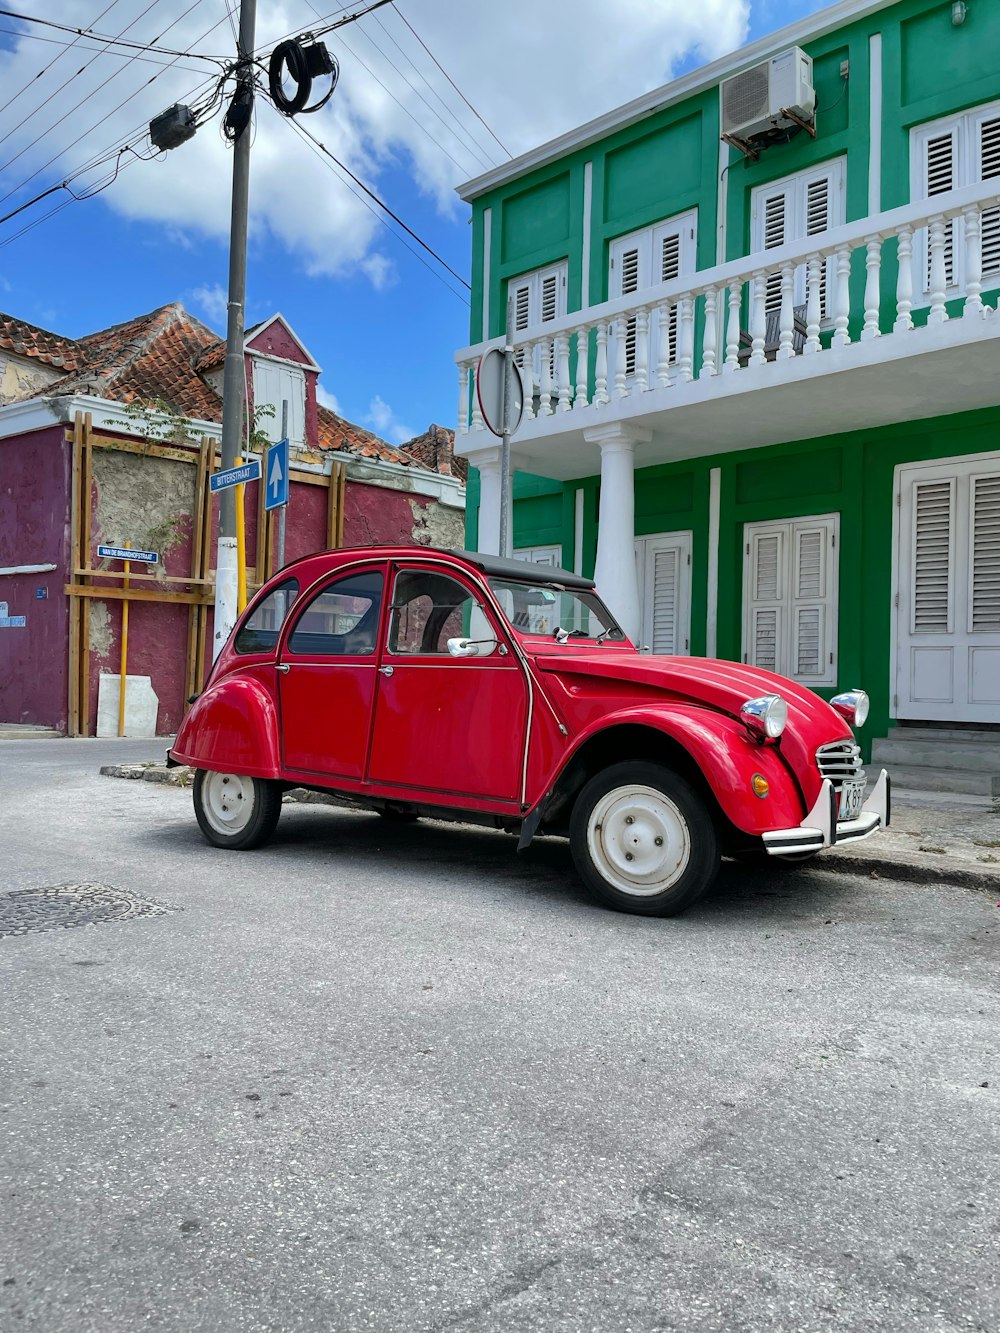 a red car parked on a street